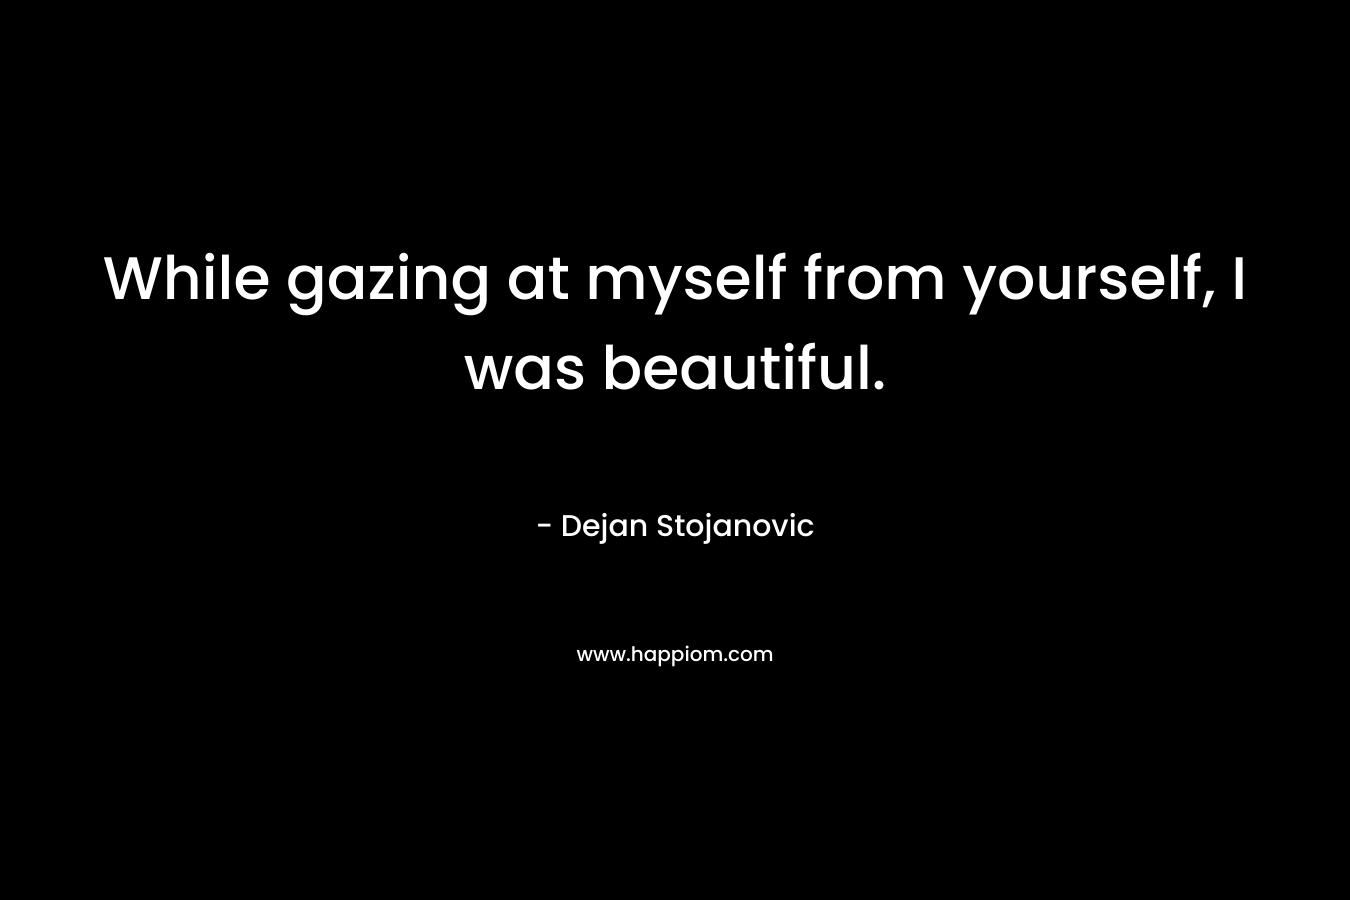 While gazing at myself from yourself, I was beautiful. – Dejan Stojanovic